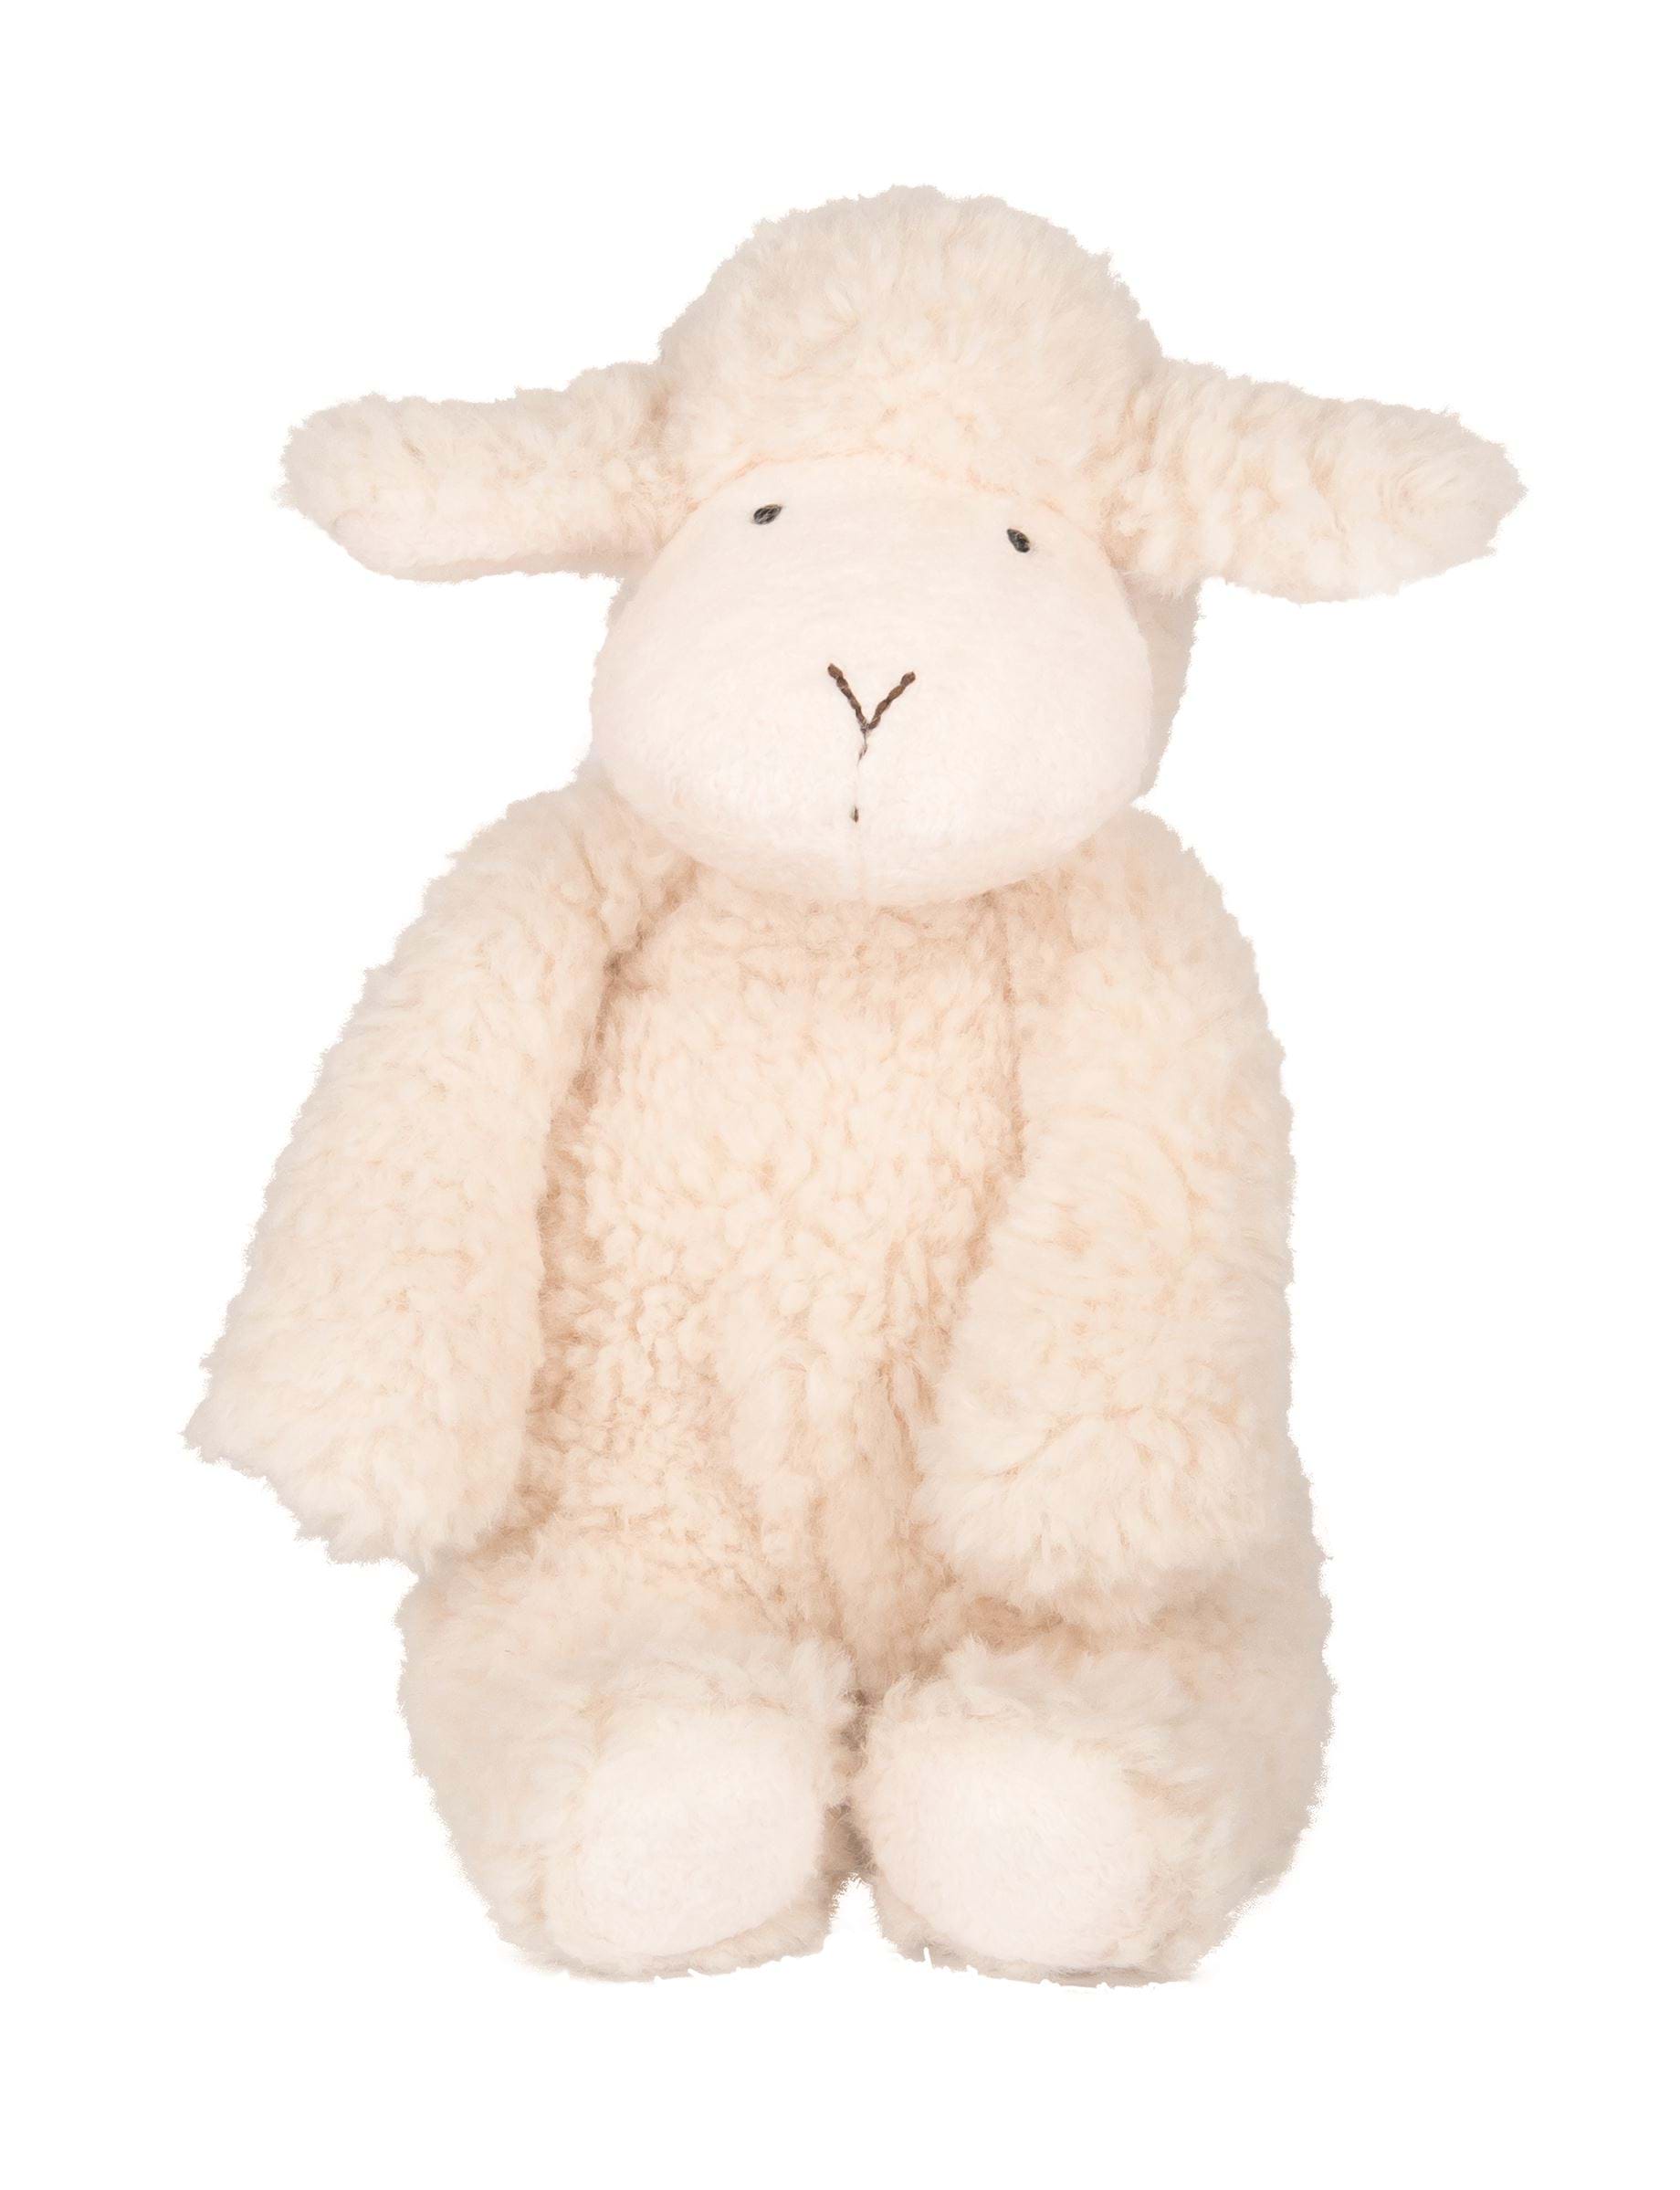 Little Sheep Soft Toy